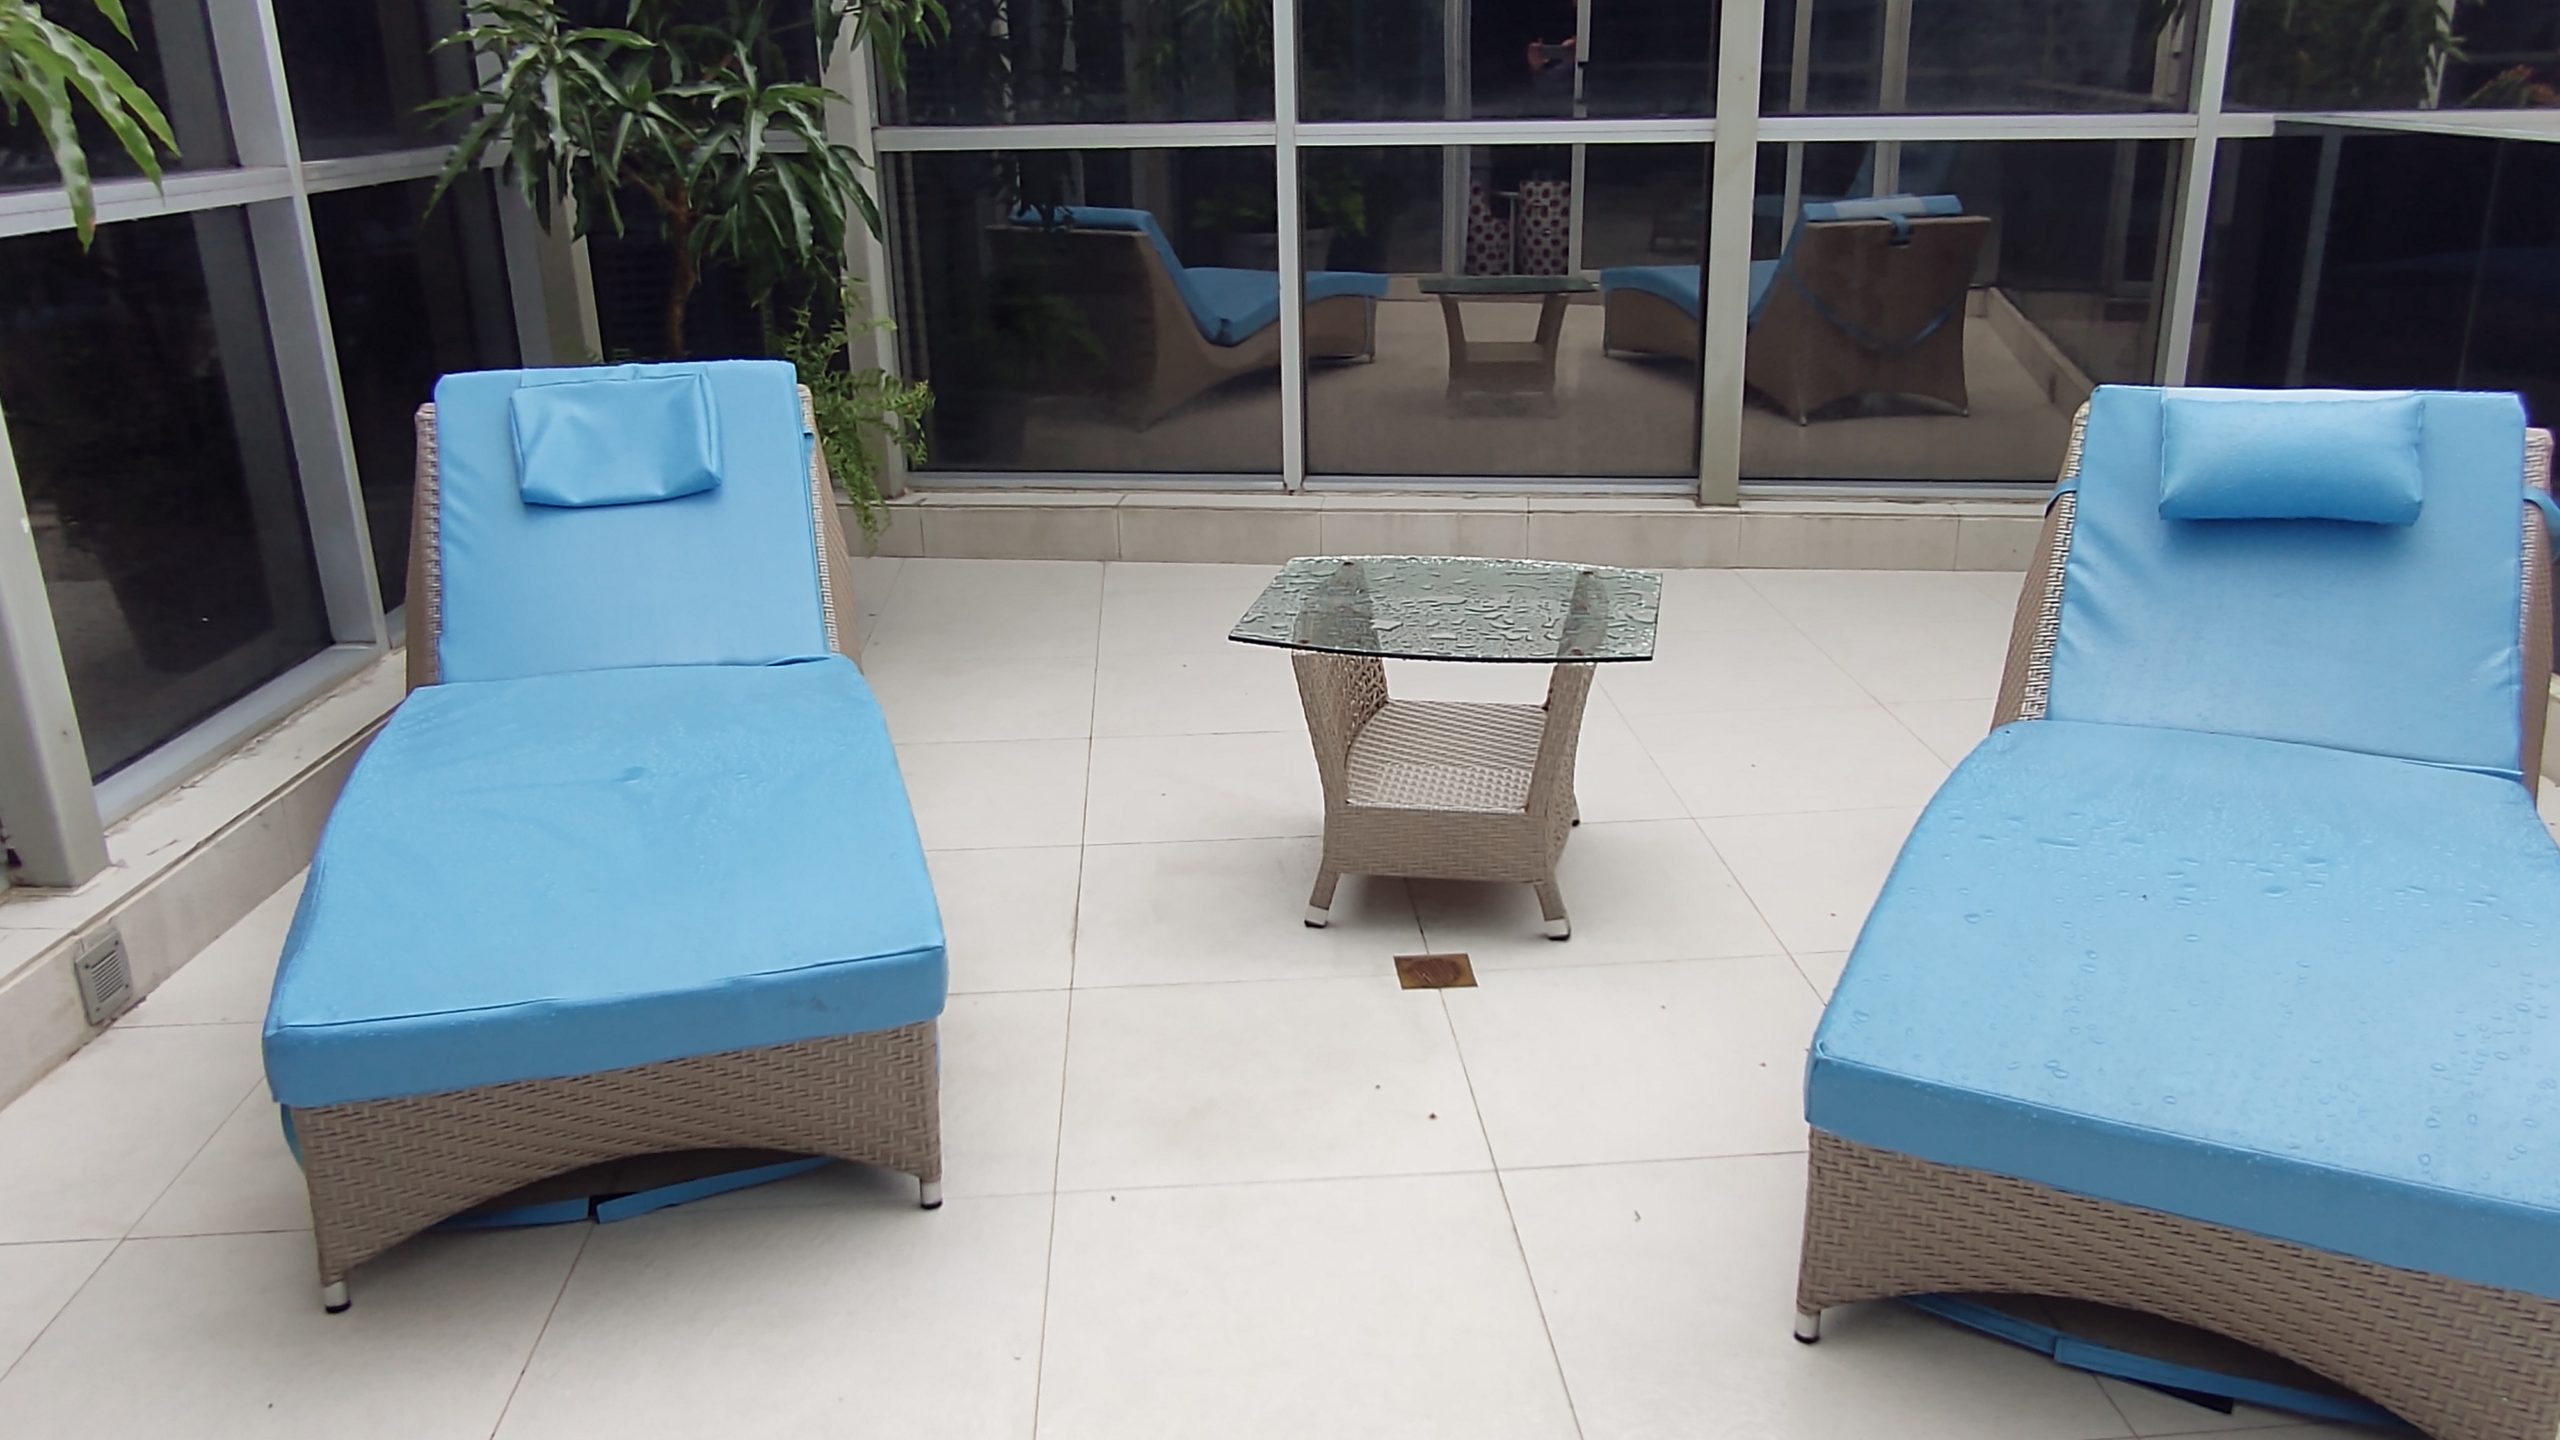 picture of the chairs and table on the patio deck of the room.